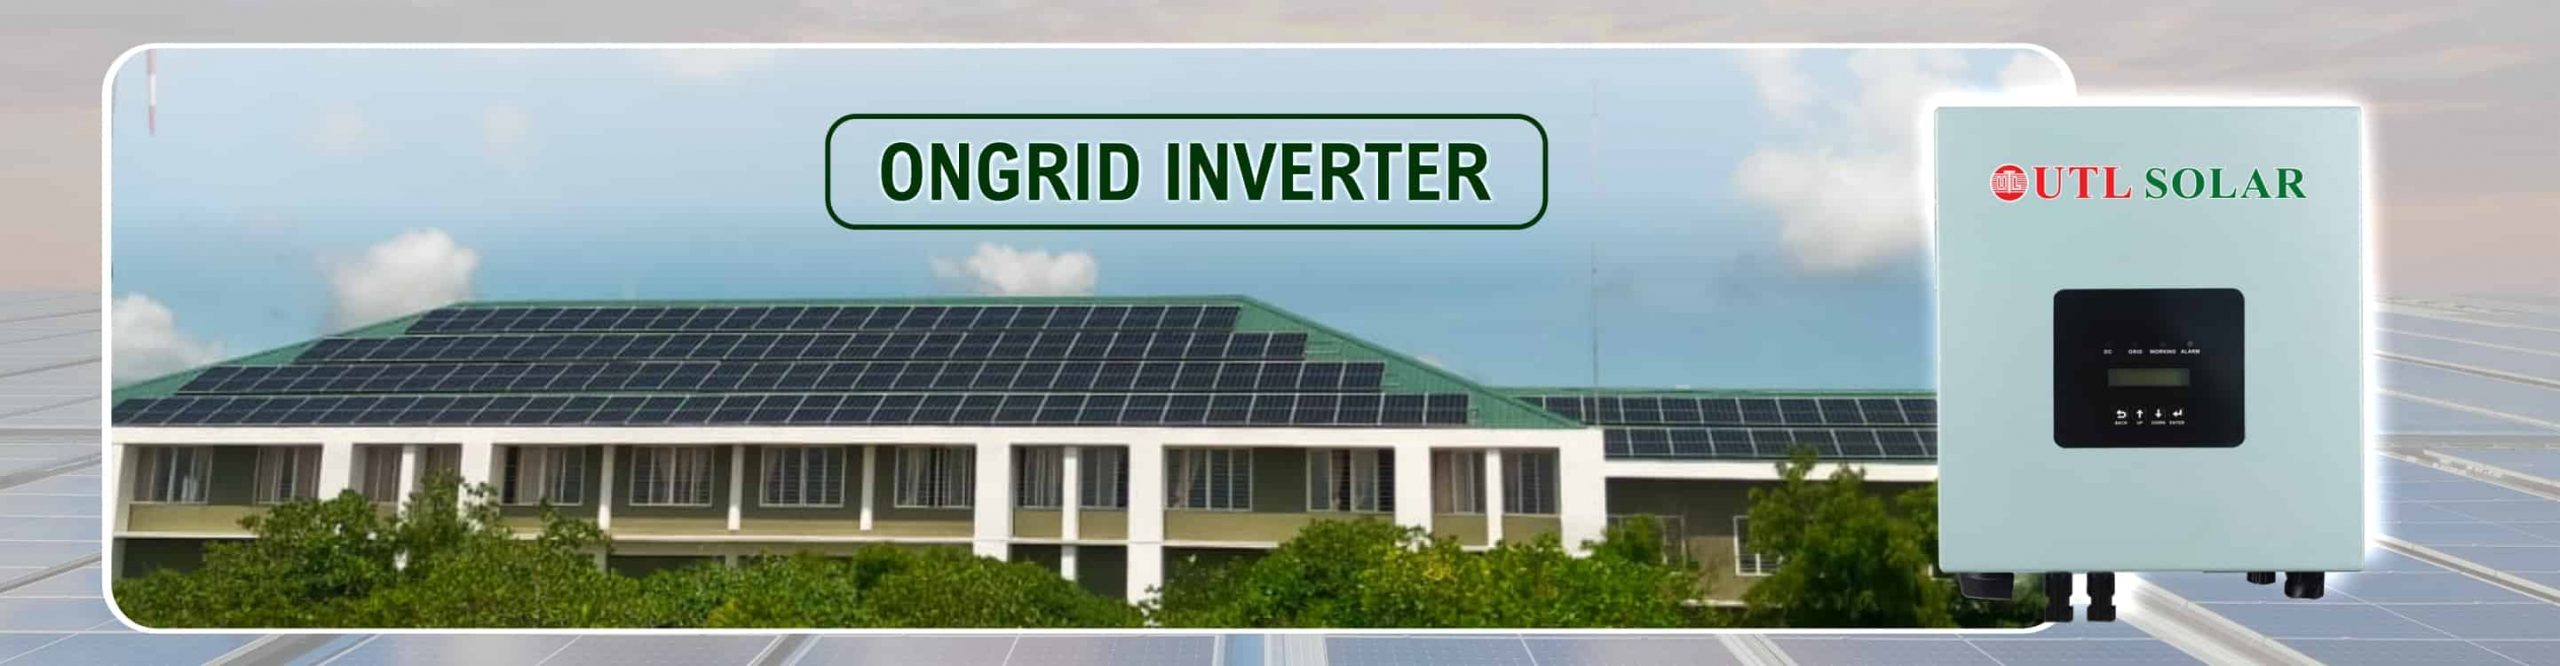 A home rooftop covering with solar panels with ongrid solar inverter